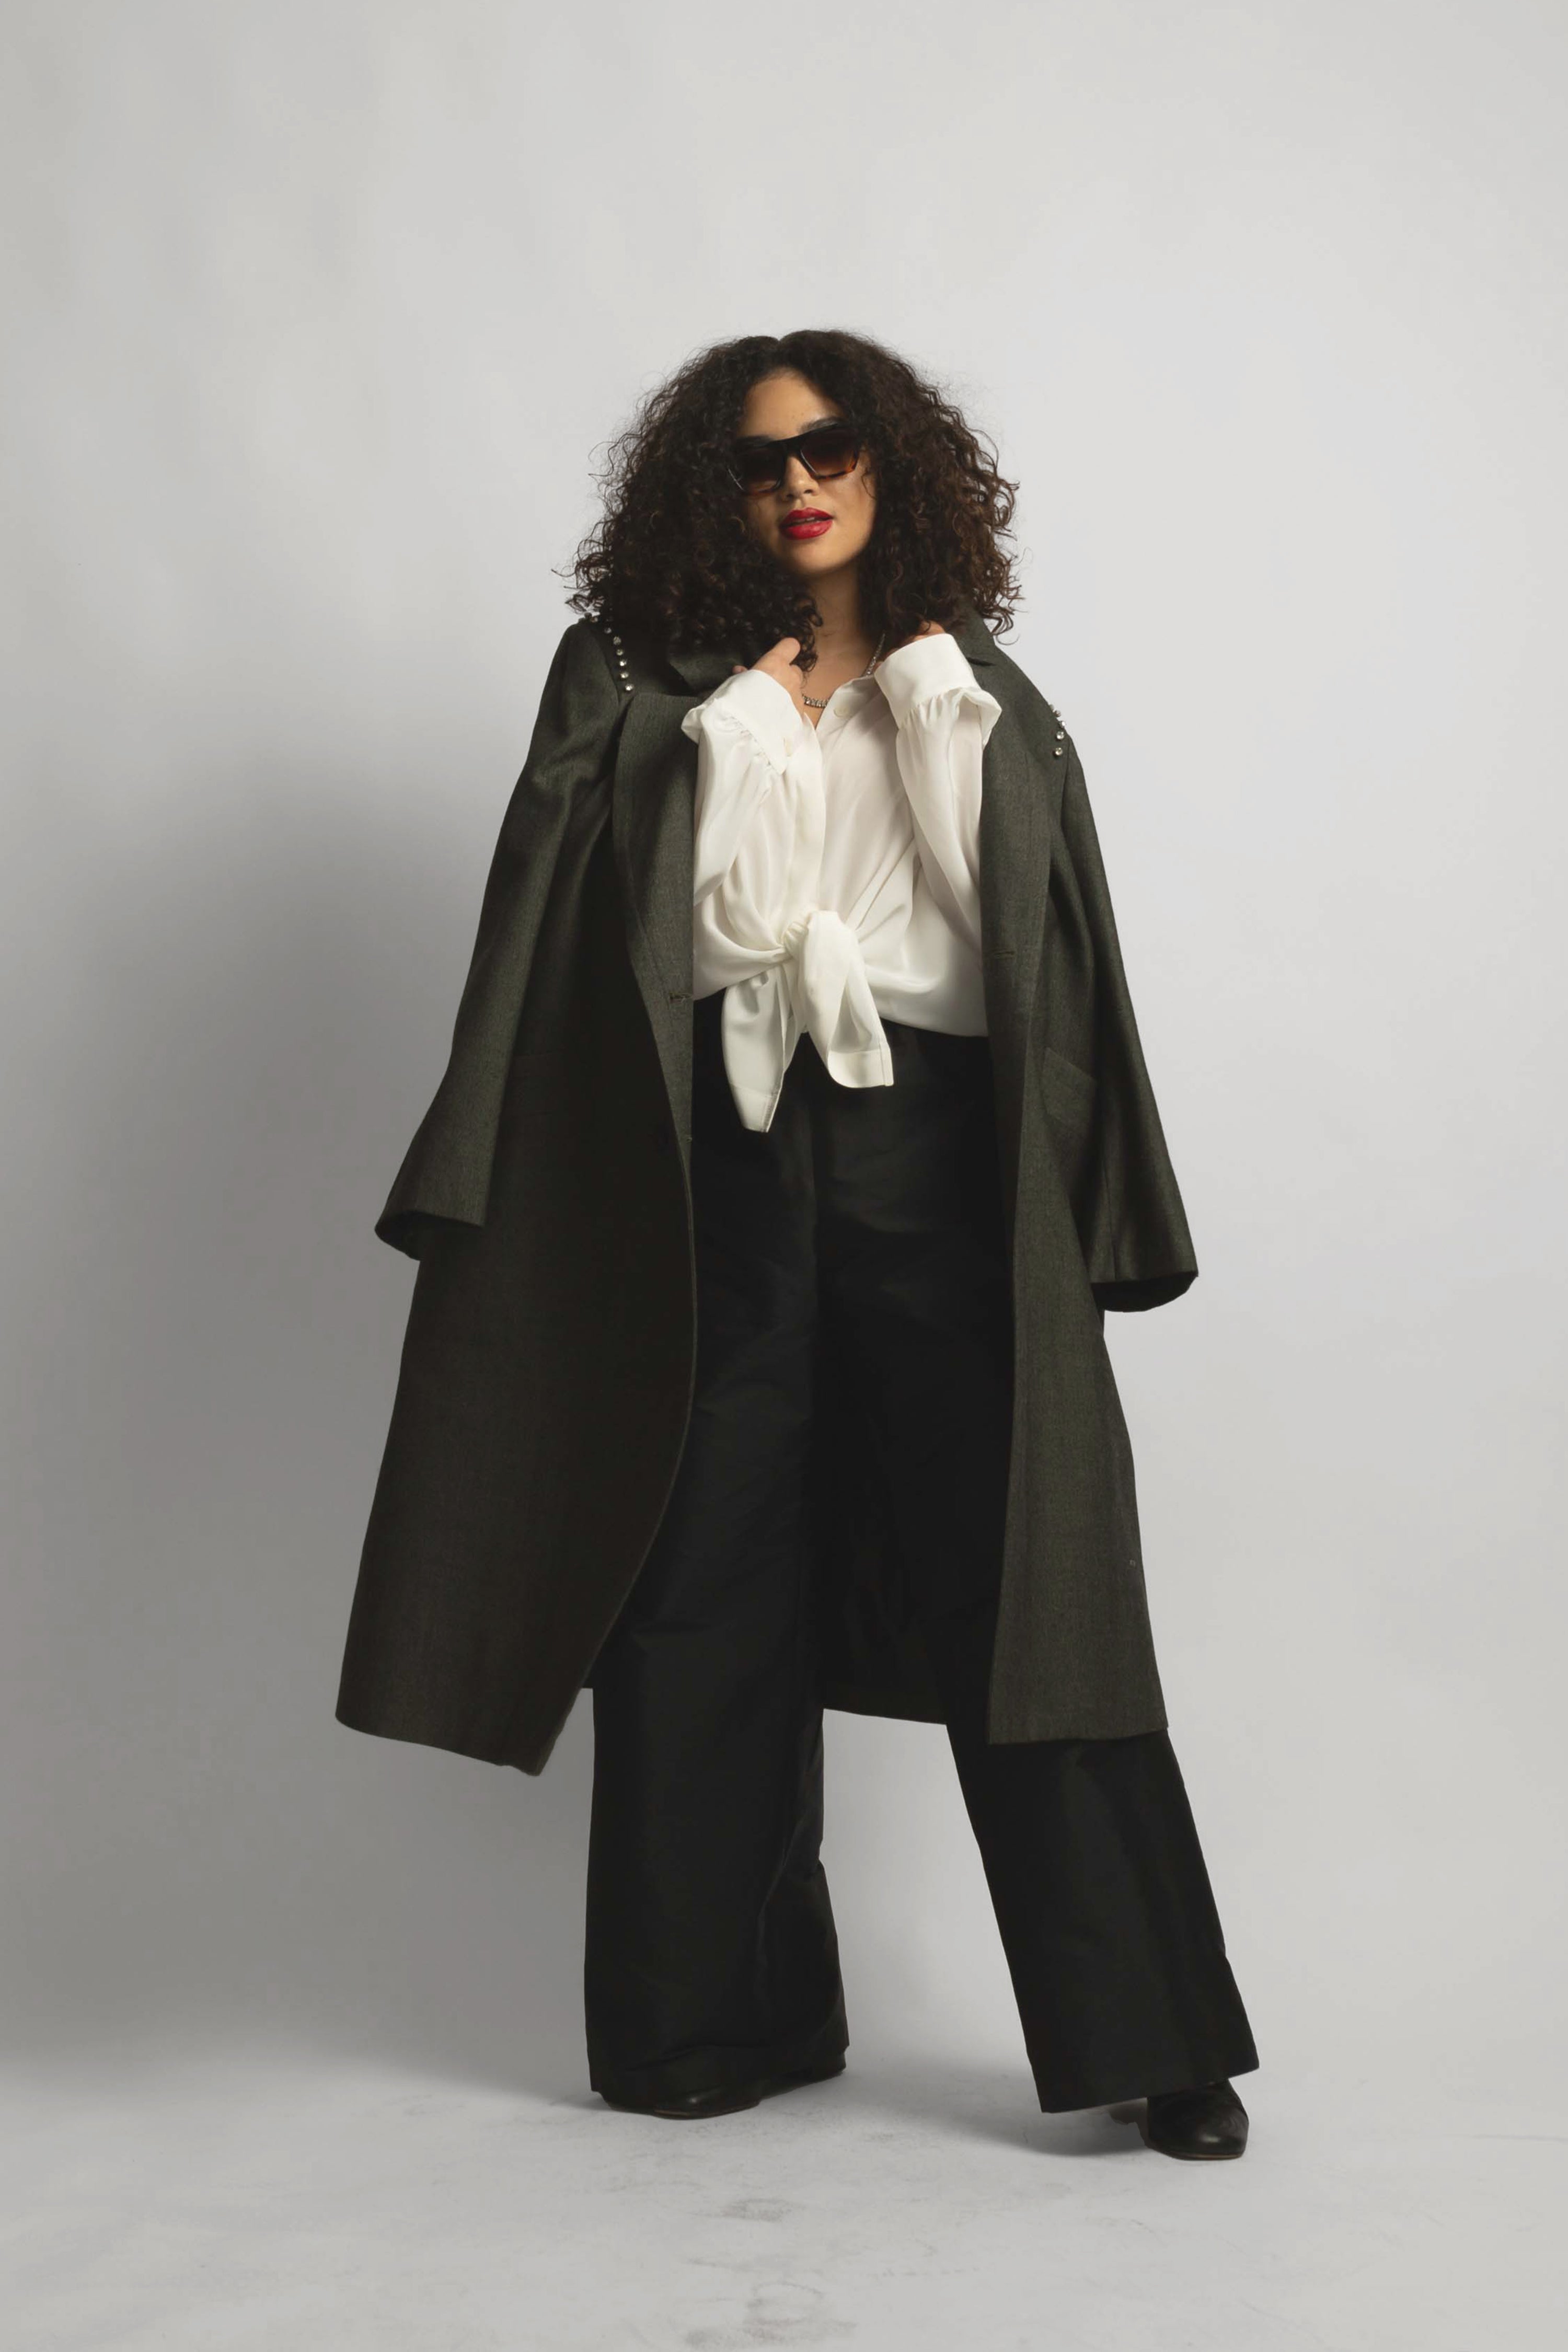 model wearing Sigourney top and coat